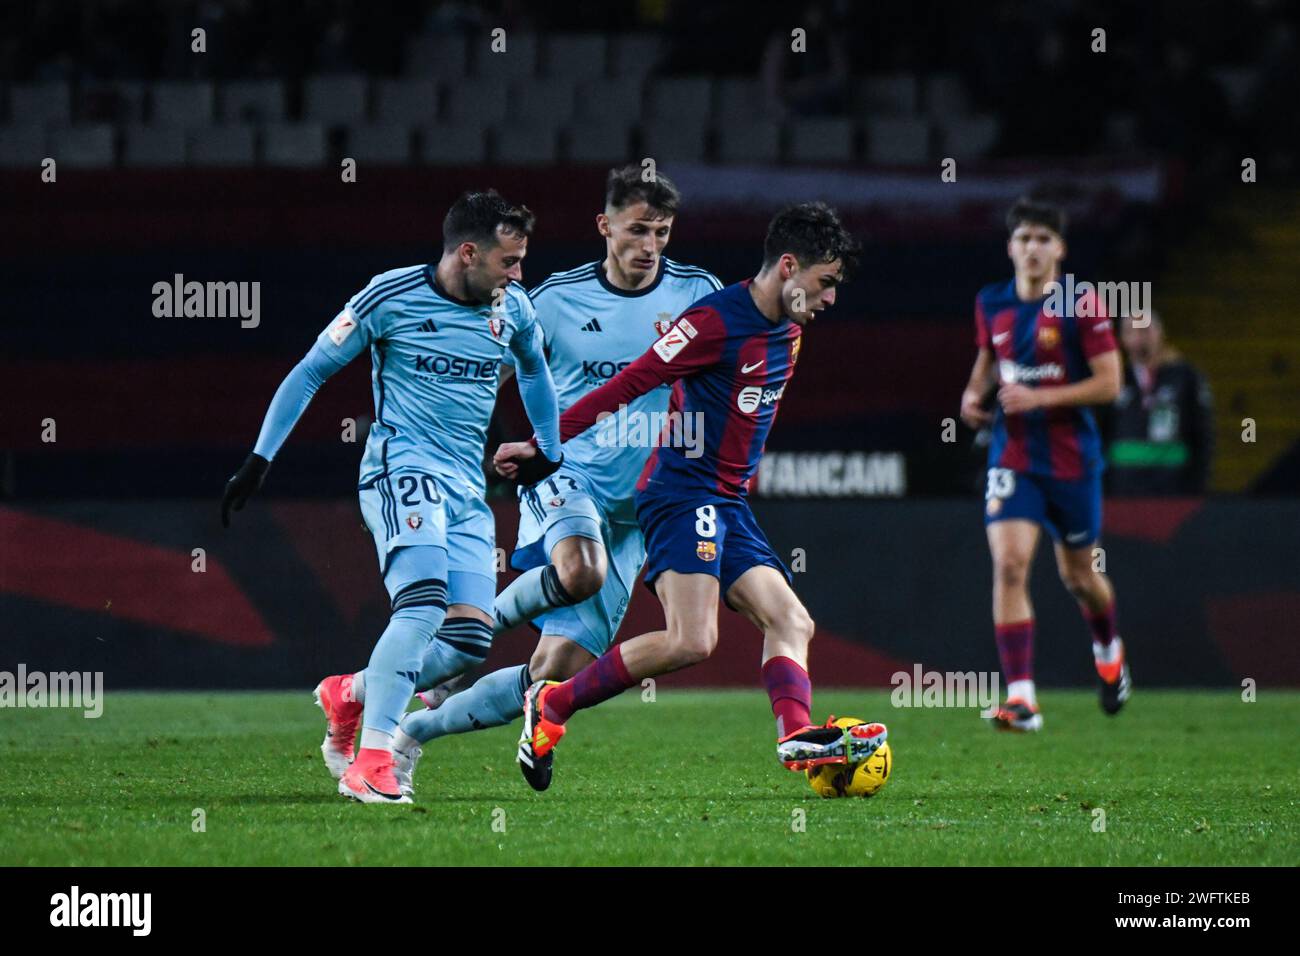 Girona, Spain. 31st Jan, 2024. BARCELONA, SPAIN - JANUARY 31: Match between FC Barcelona and Osasuna CF as part of La Liga at Lluis Companys Stadium on January 31, 2024 in Girona, Spain. (Photo by Sara Aribó/PxImages) Credit: Px Images/Alamy Live News Stock Photo